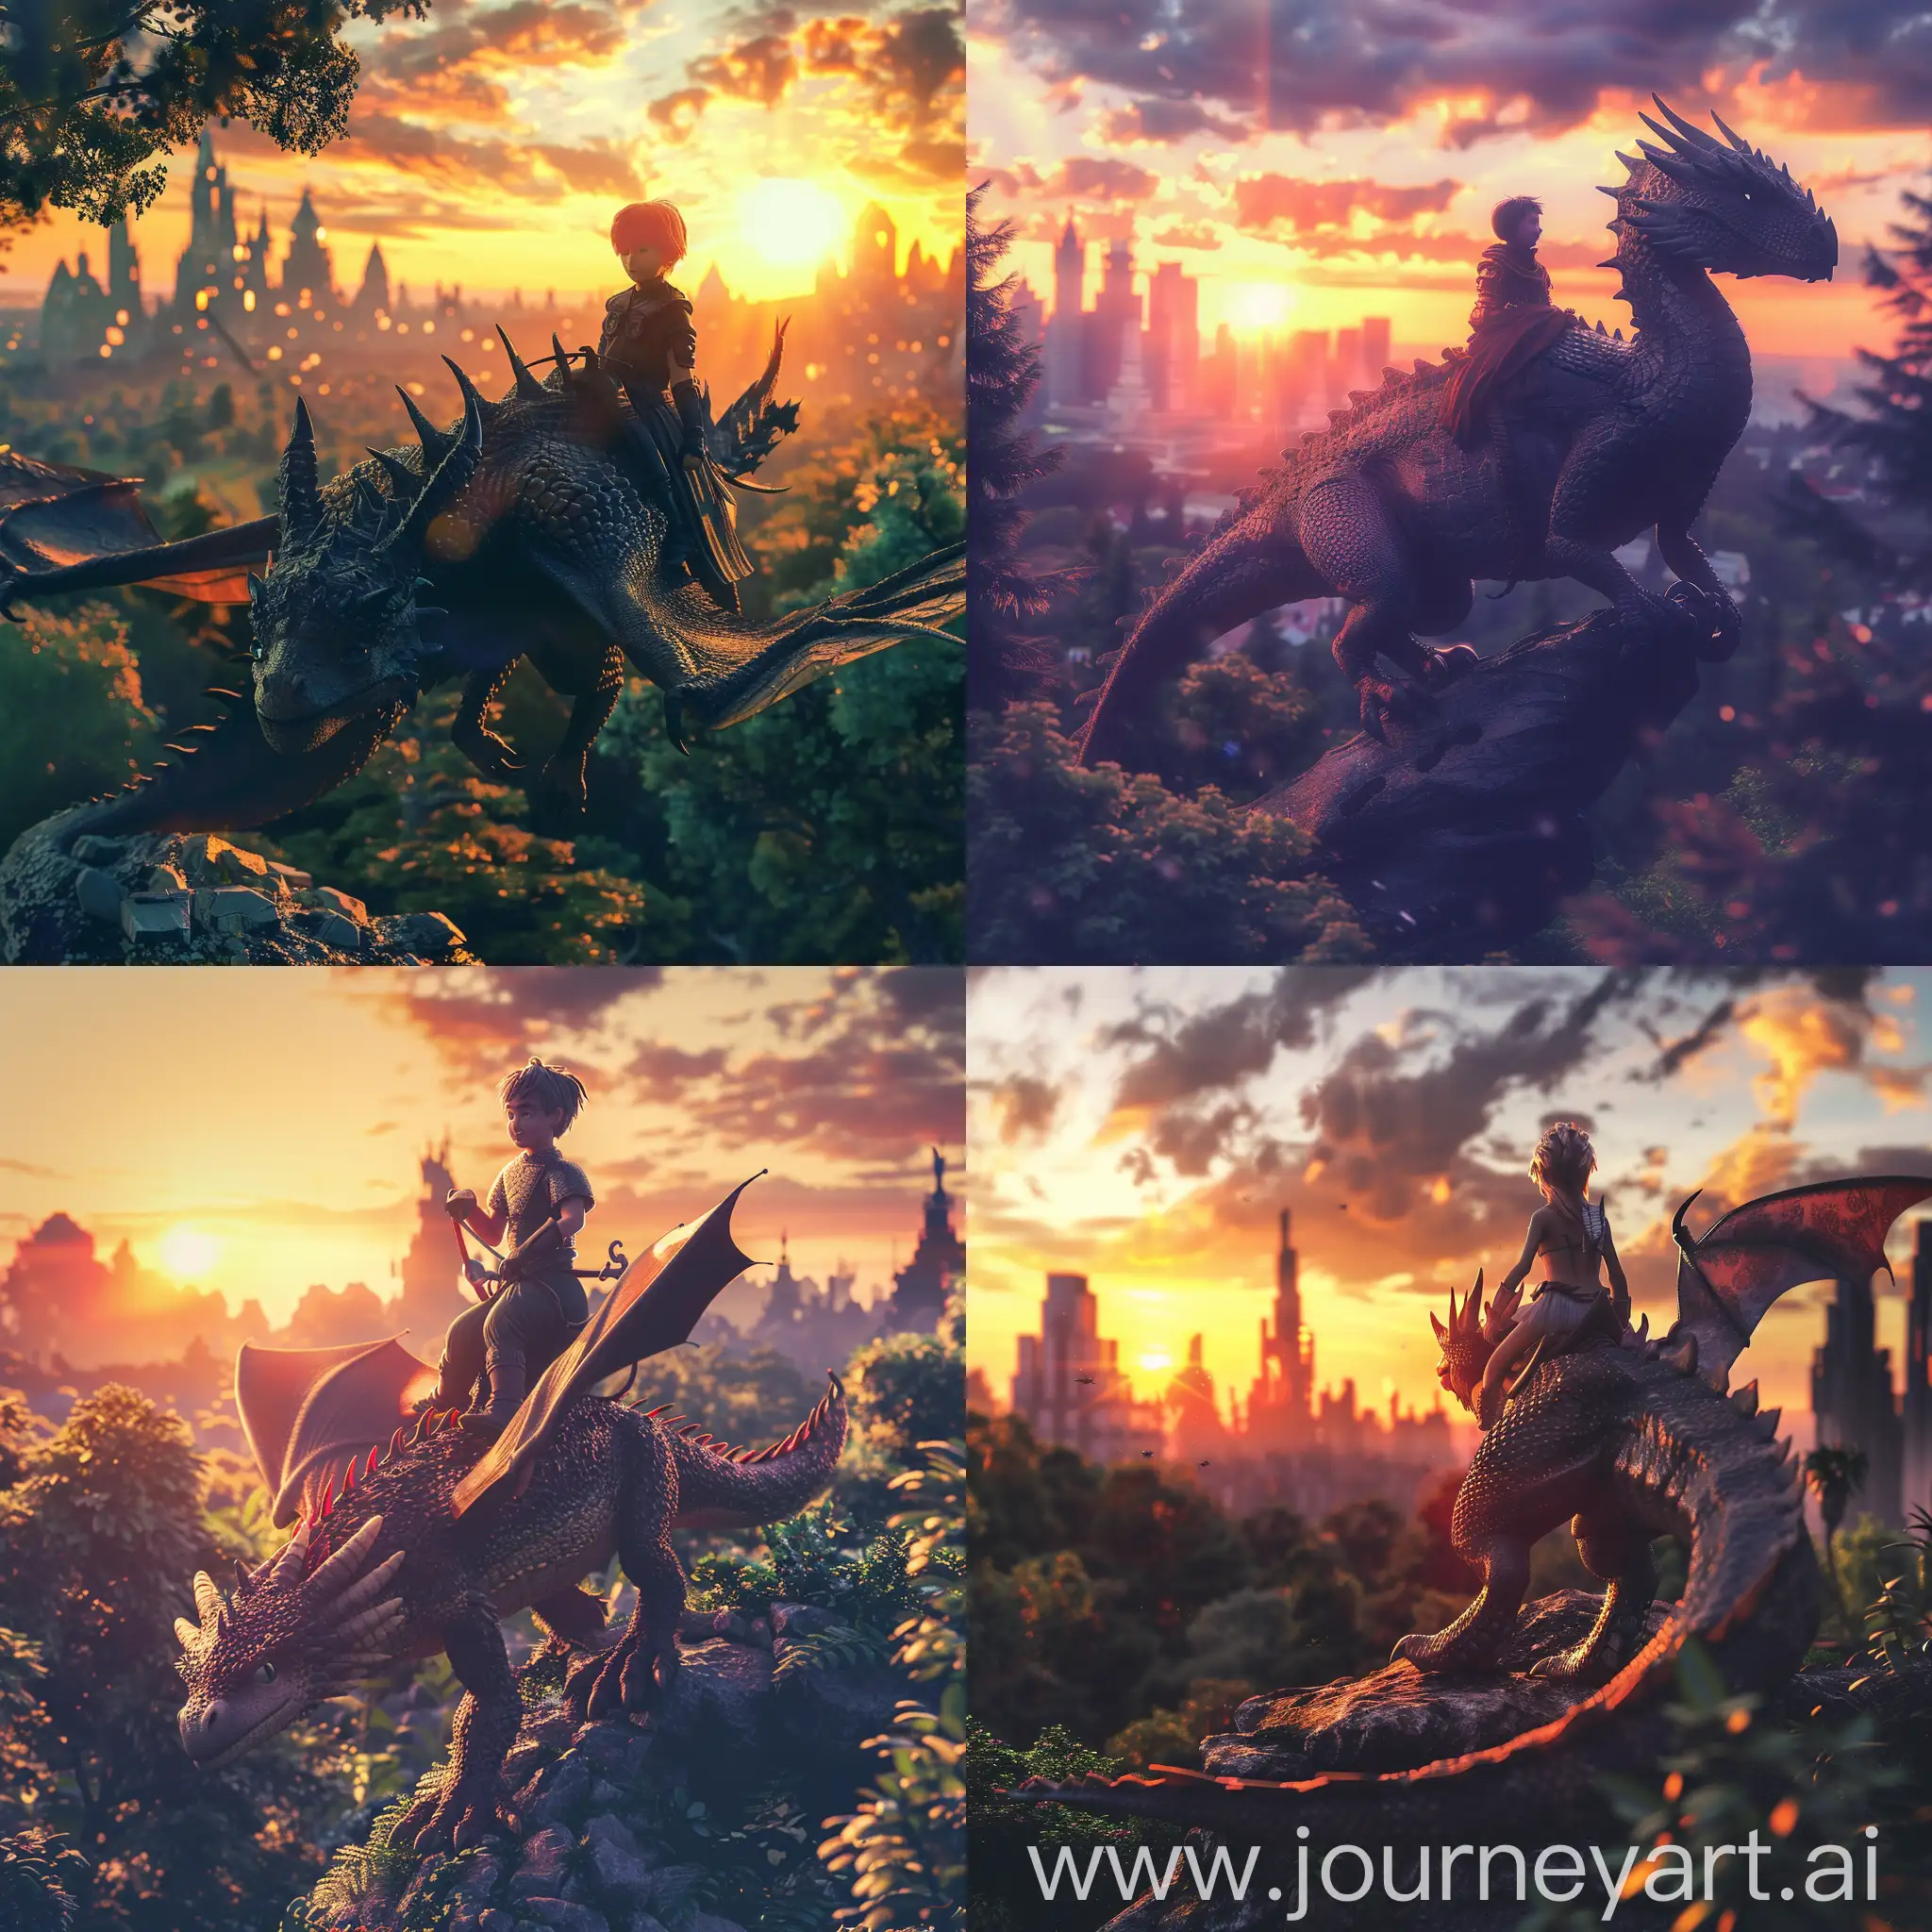 Fantasy-Dragon-Rider-at-Sunset-in-Lush-Forest